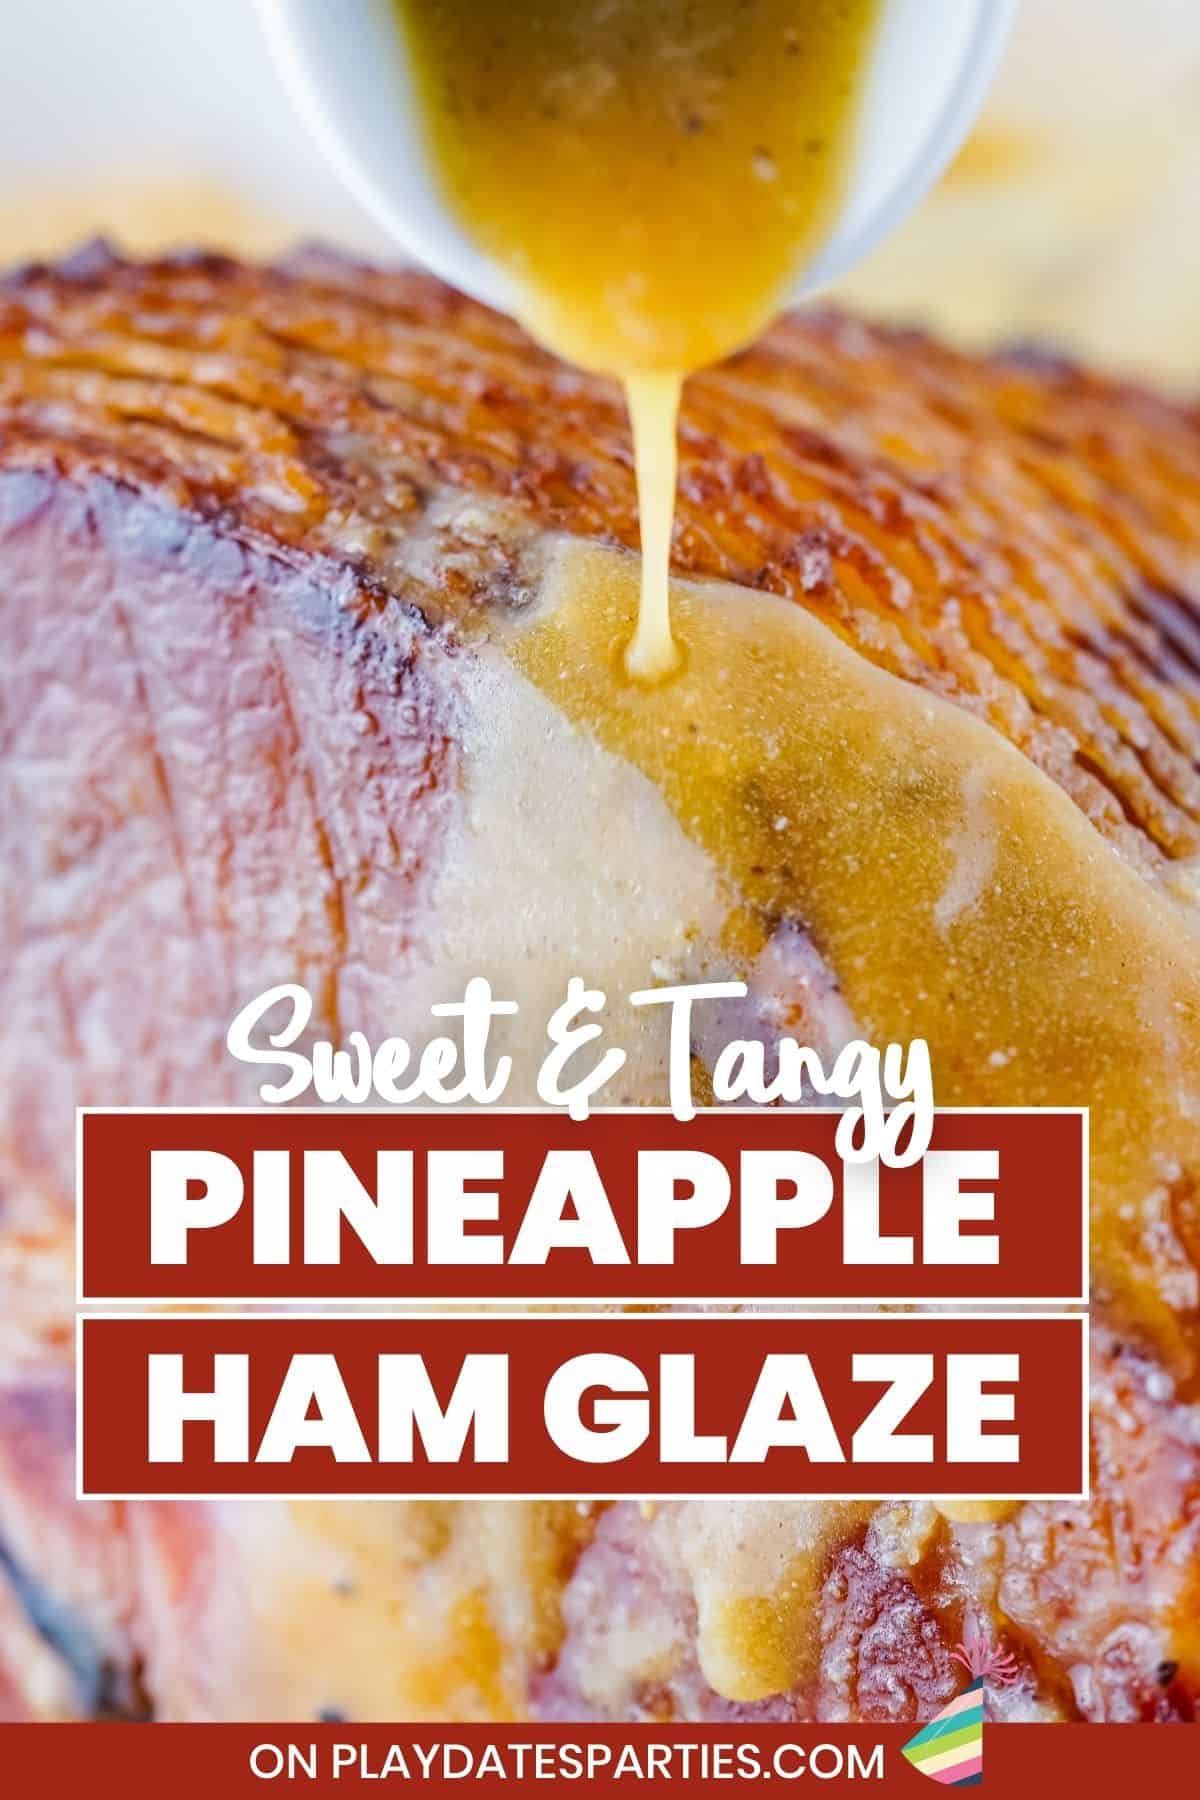 Sweet and tangy pineapple ham glaze pin image.